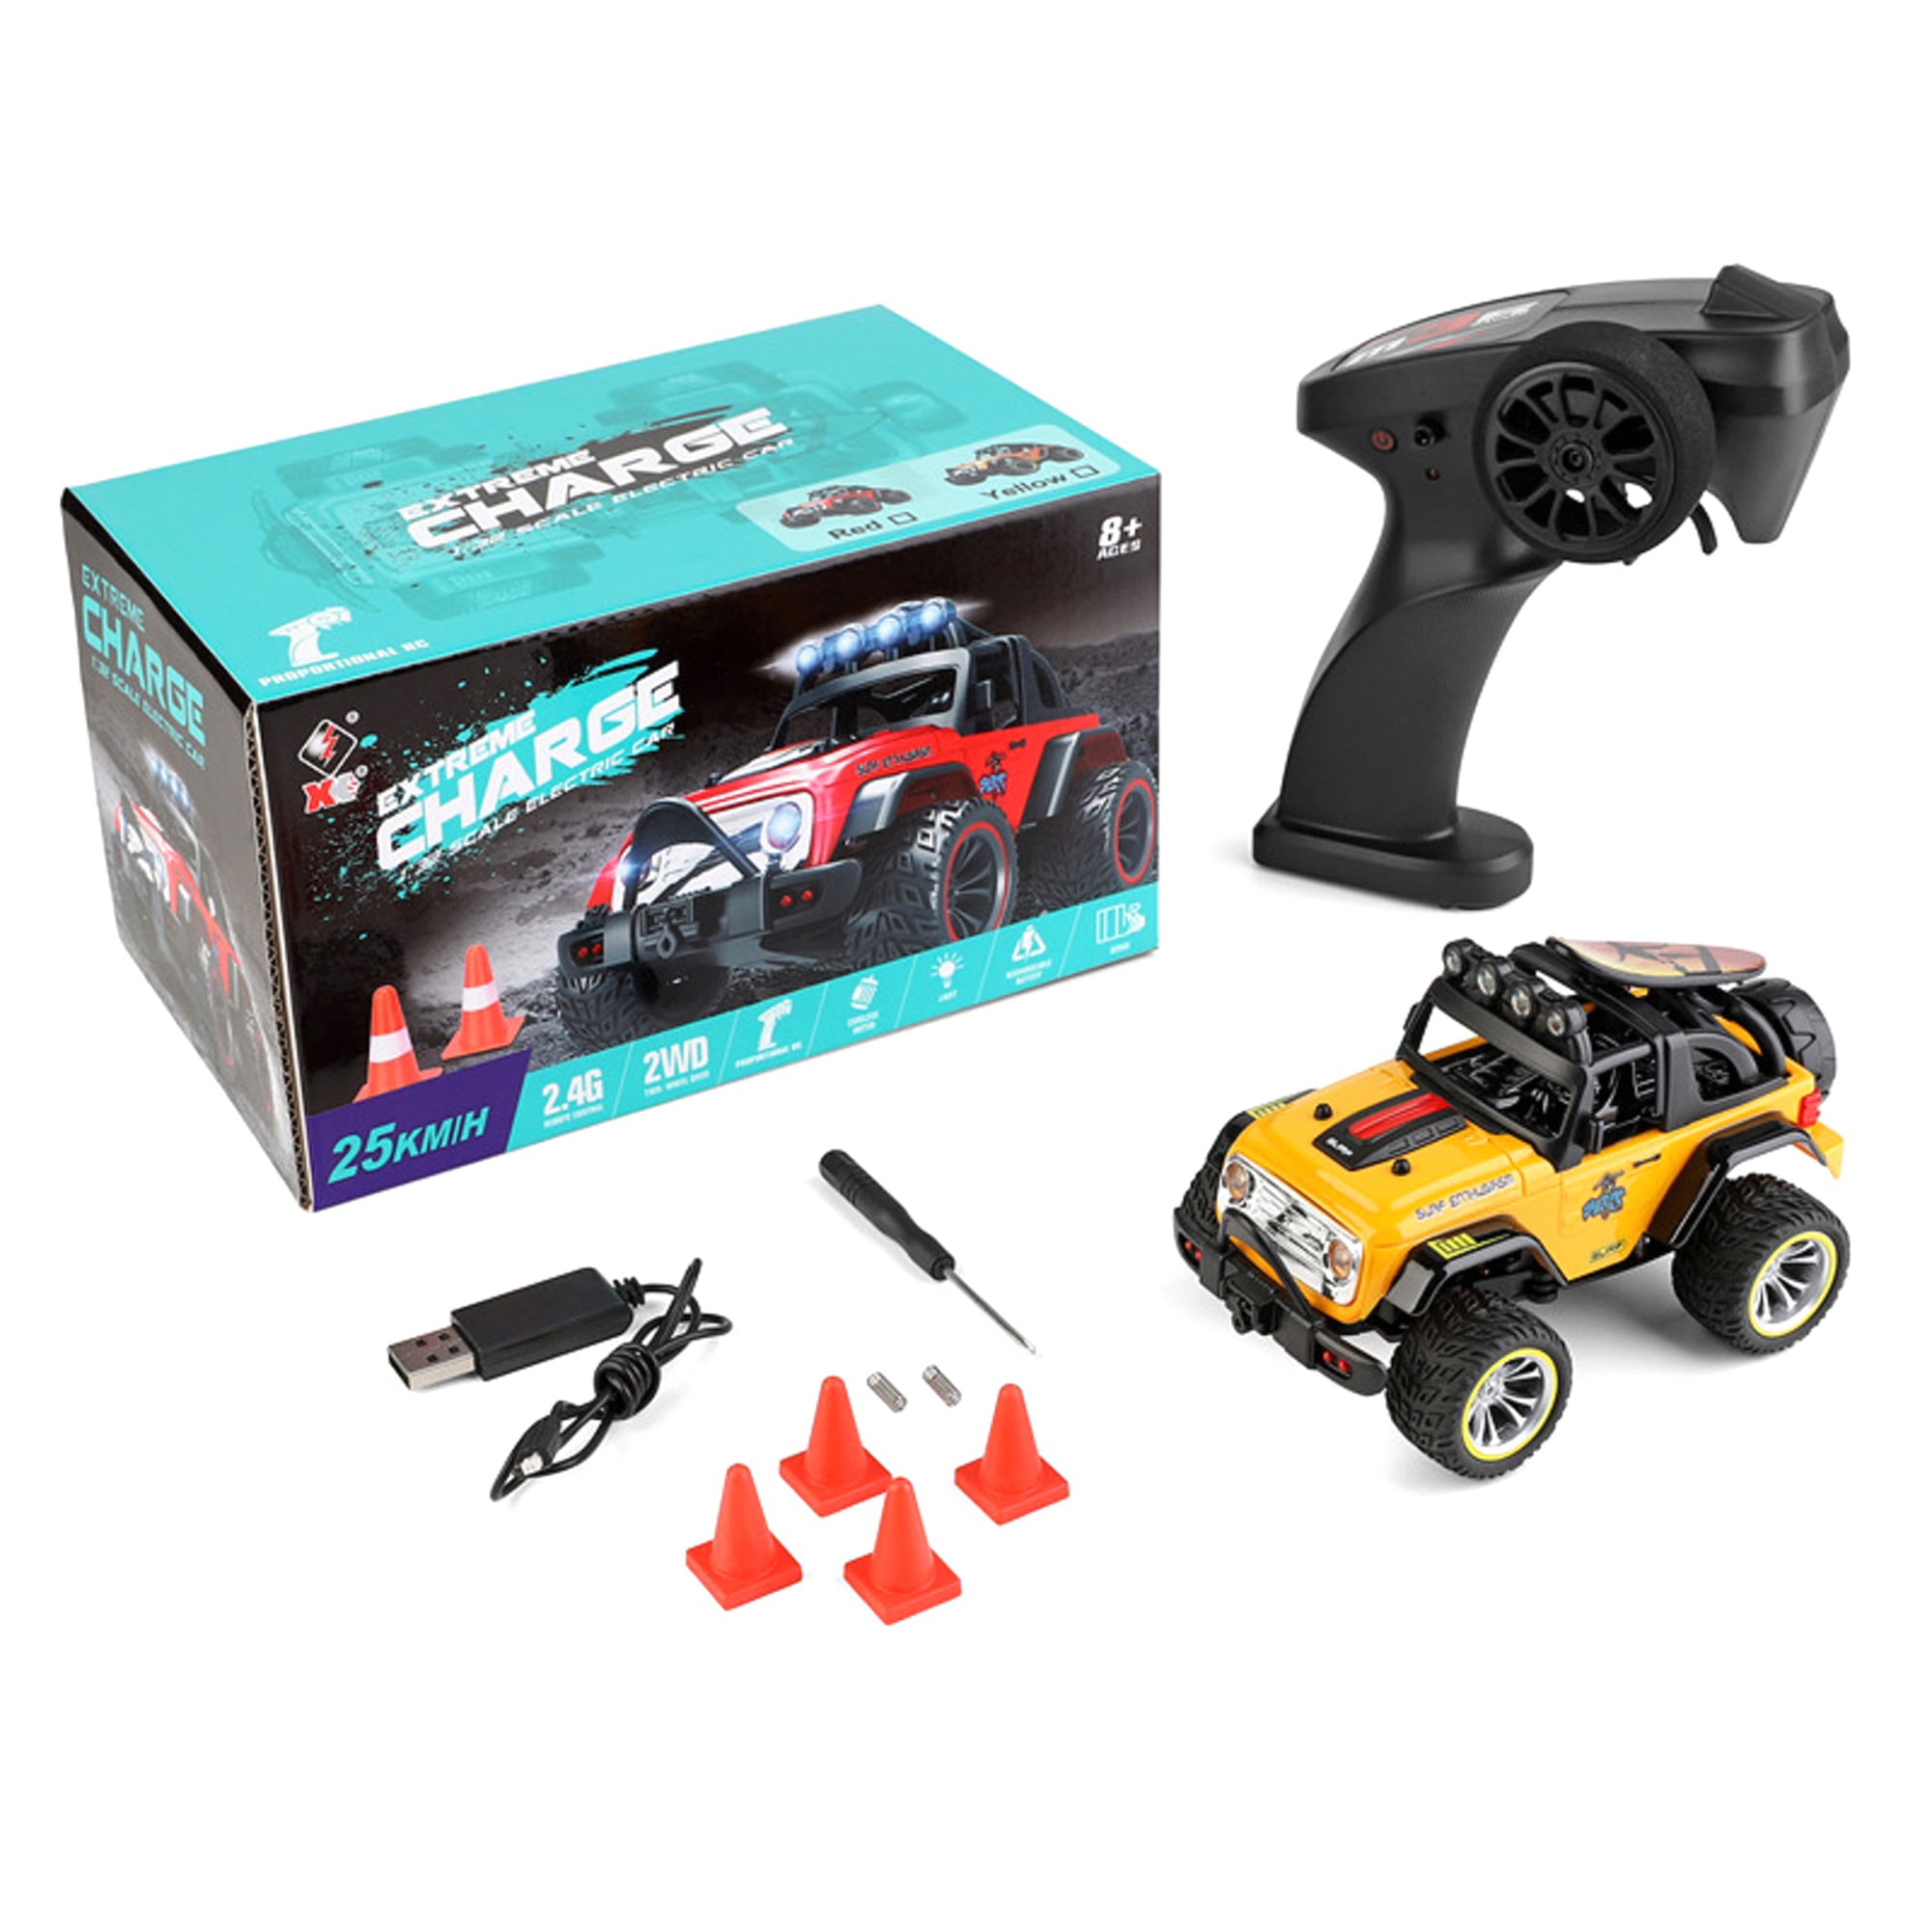 2.4G Mini RC Off-Road Vehicle 1:32 High Speed RC Car Toy High Simulation Remote Control SUV 